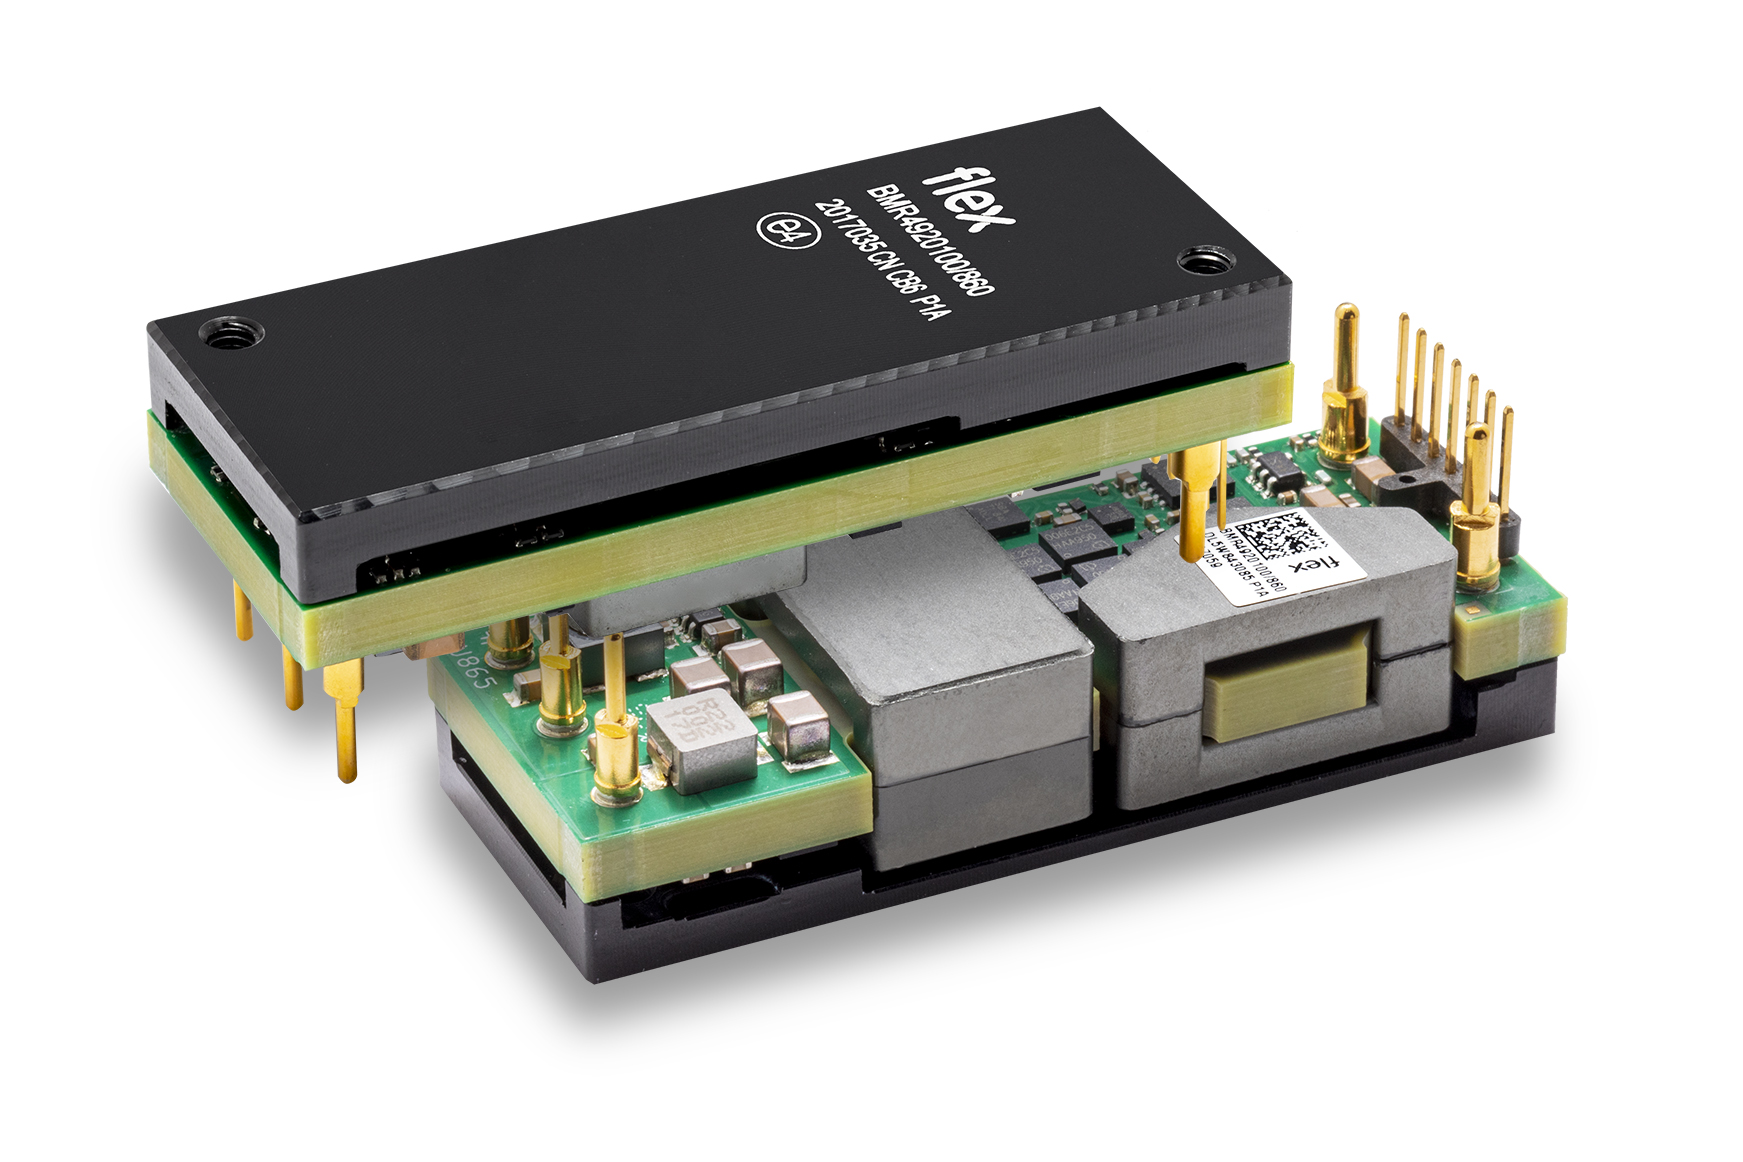 DC/DC Converters Deliver up to 1100 W Power Capability